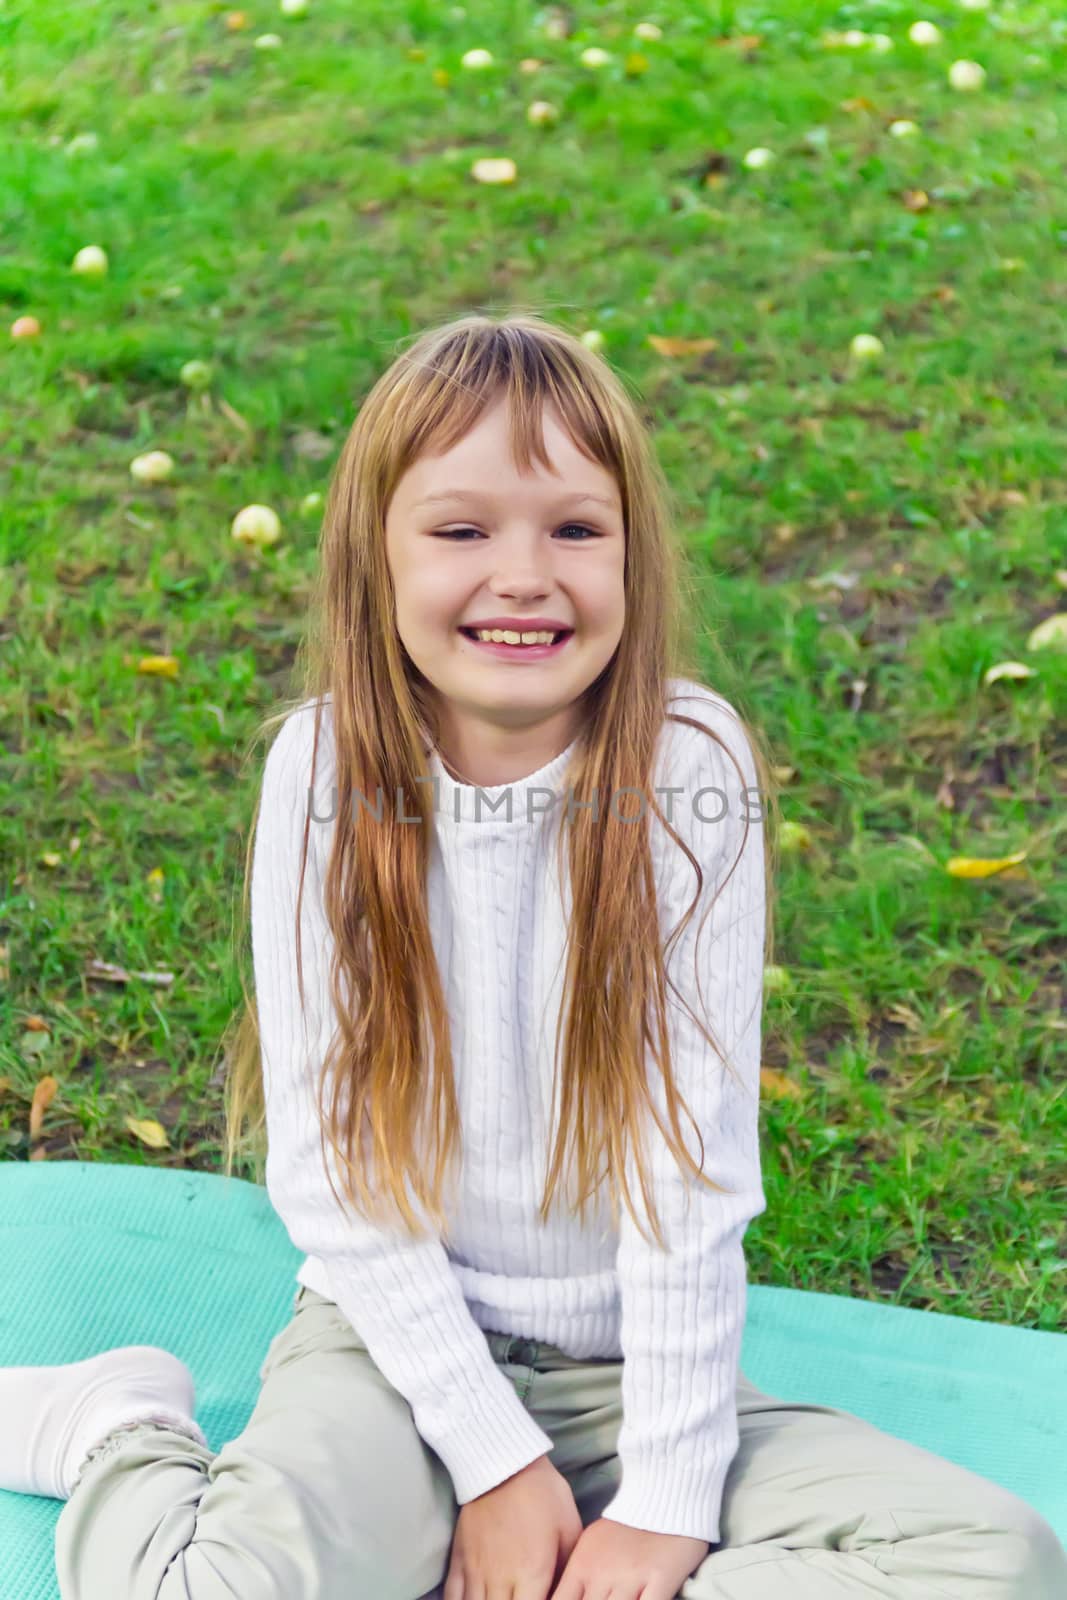 Photo of cute smiling girl with long hair